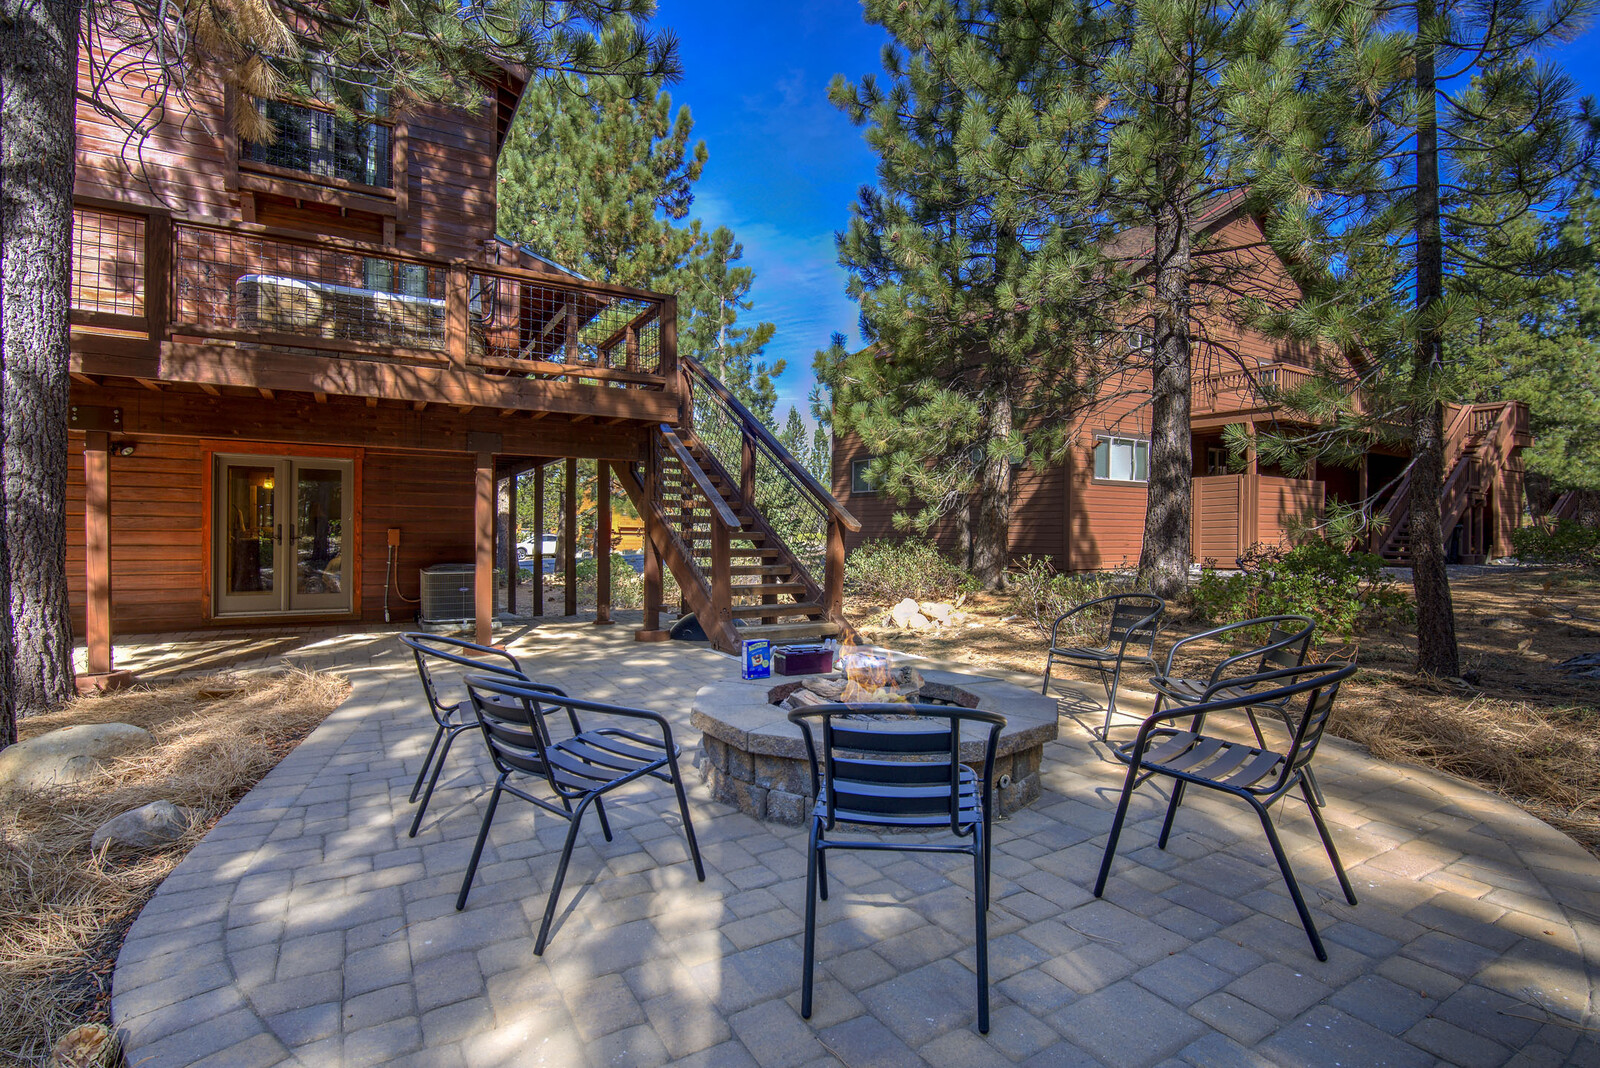 Tahoe-Donner-Vacation-Rental-Wolfgang-fire-pit5